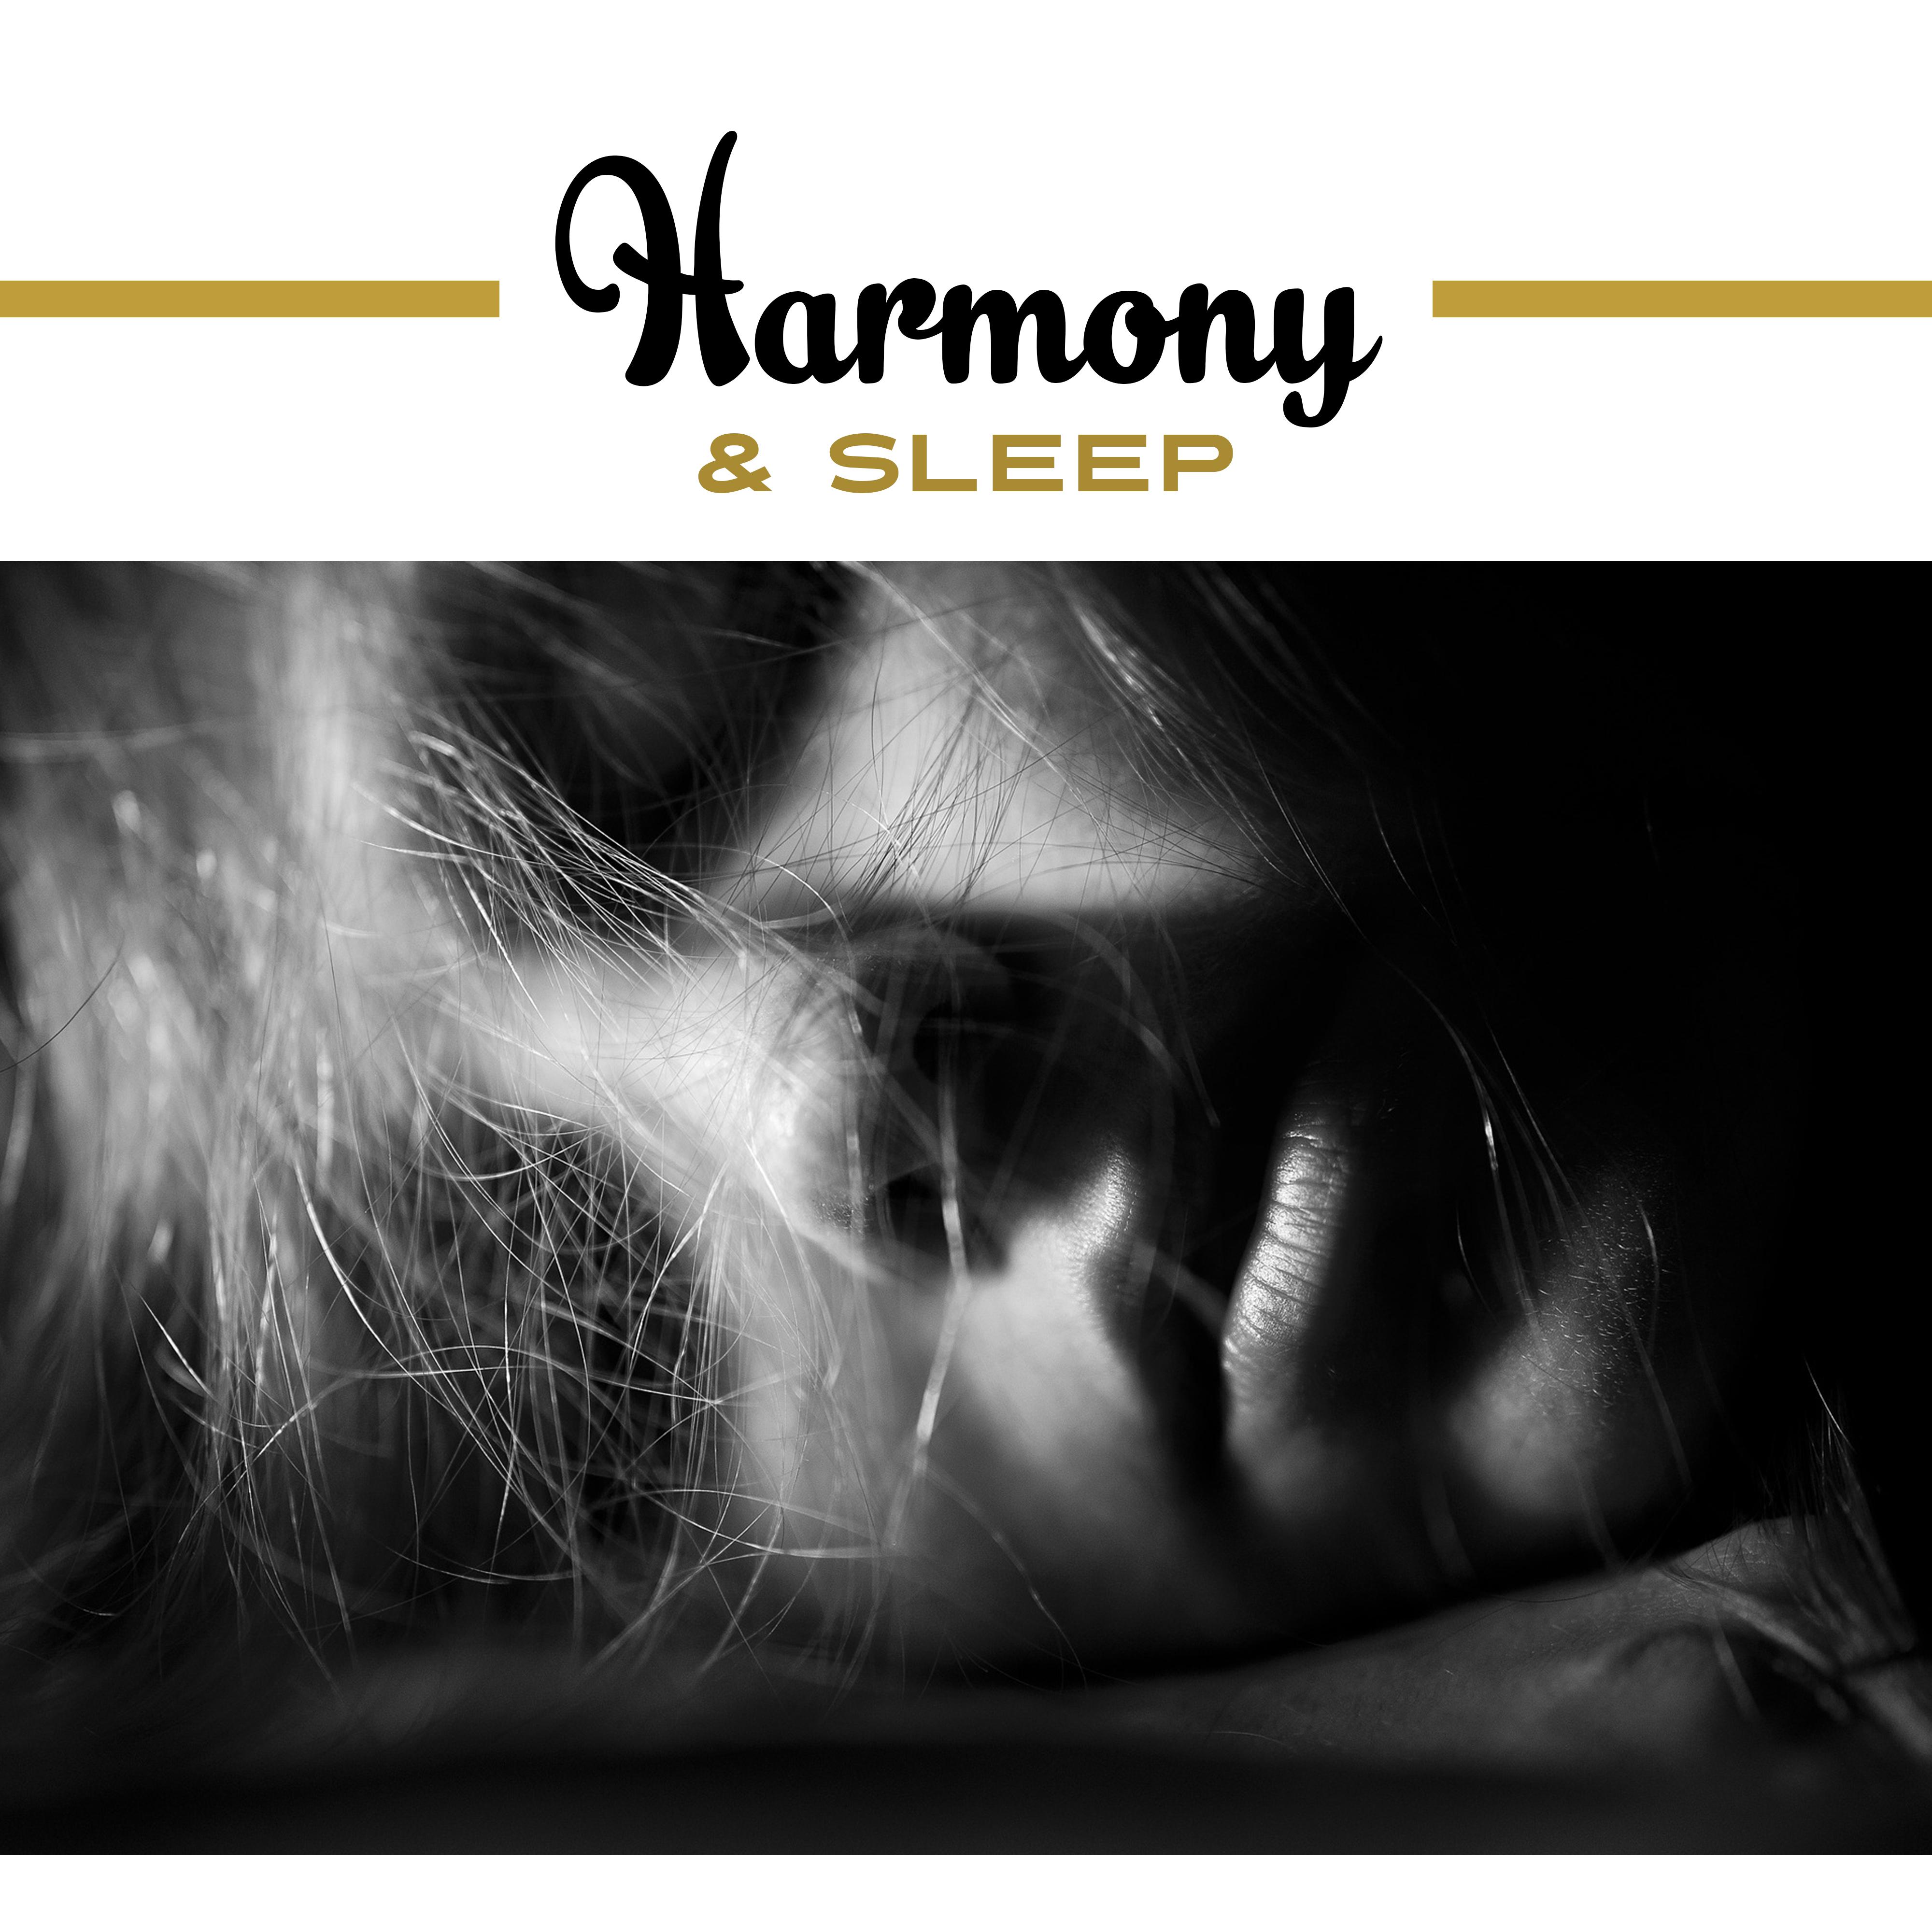 Harmony  Sleep  Sweet Dreams at Goodnight, Calm Lullaby, Relaxation, Bedtime, Soft Sounds for Sleep, Music to Pillow